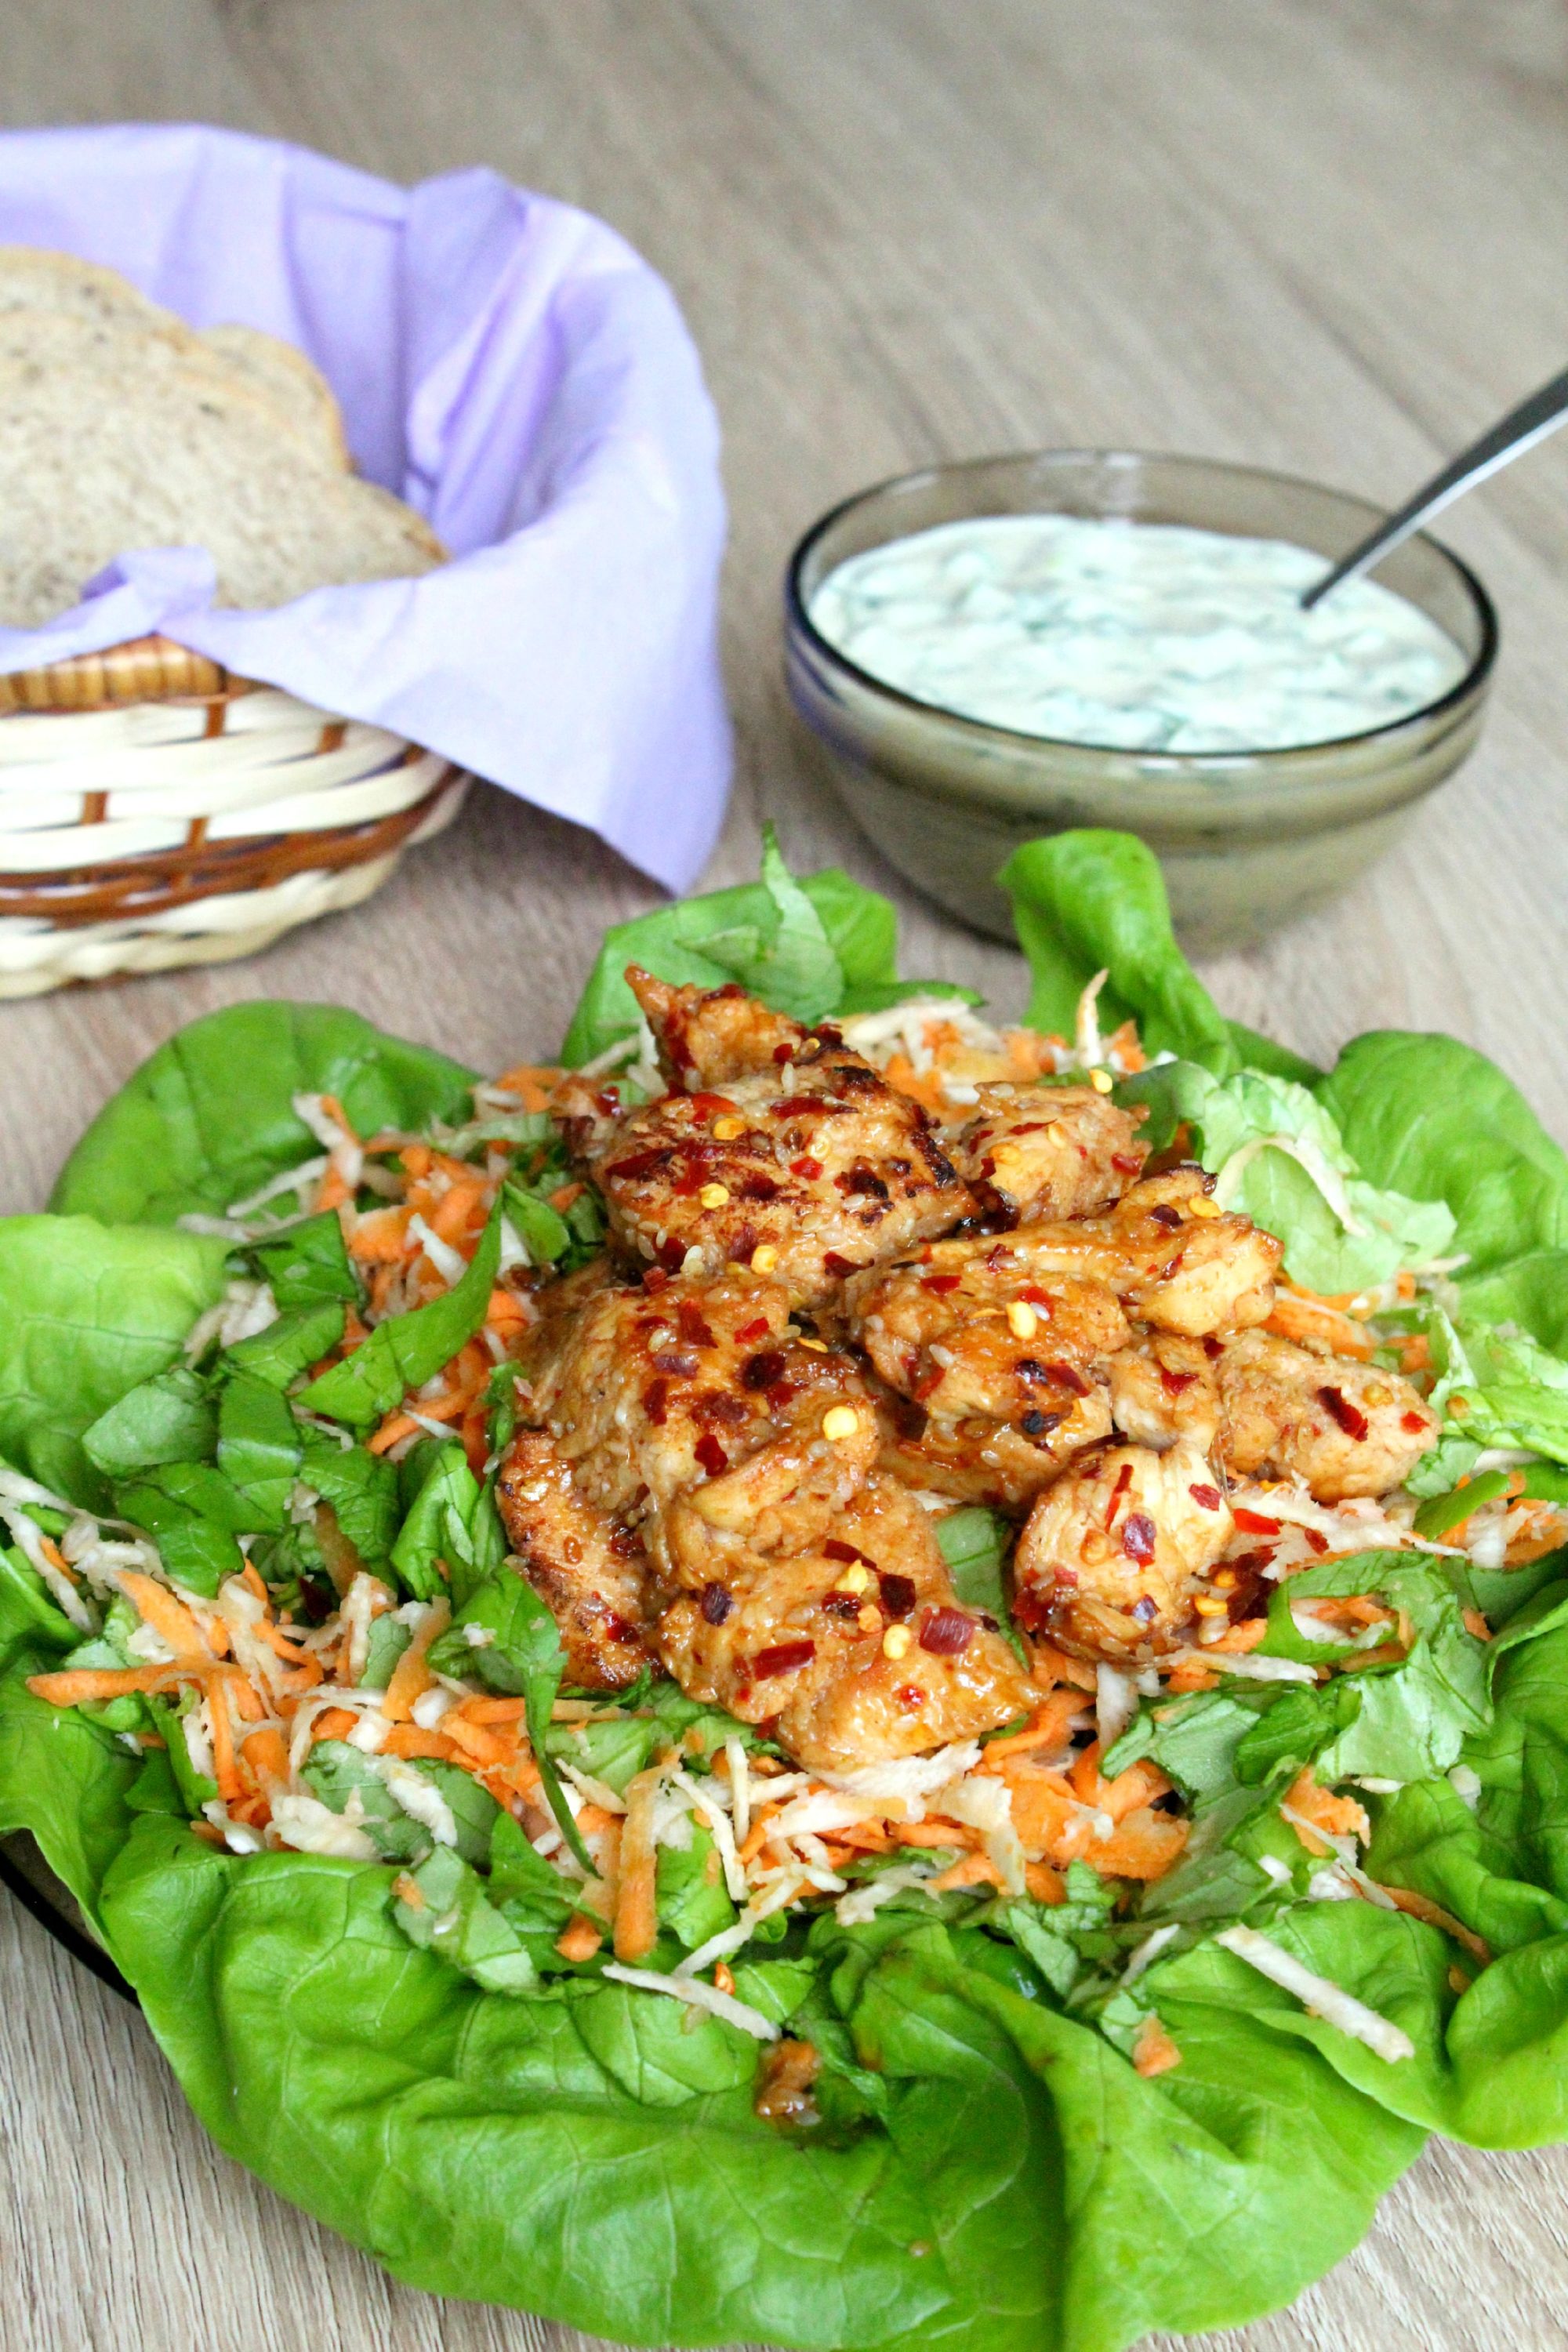 Yummy and healthy spicy chicken salad with root vegetables and yogurt mustard sauce